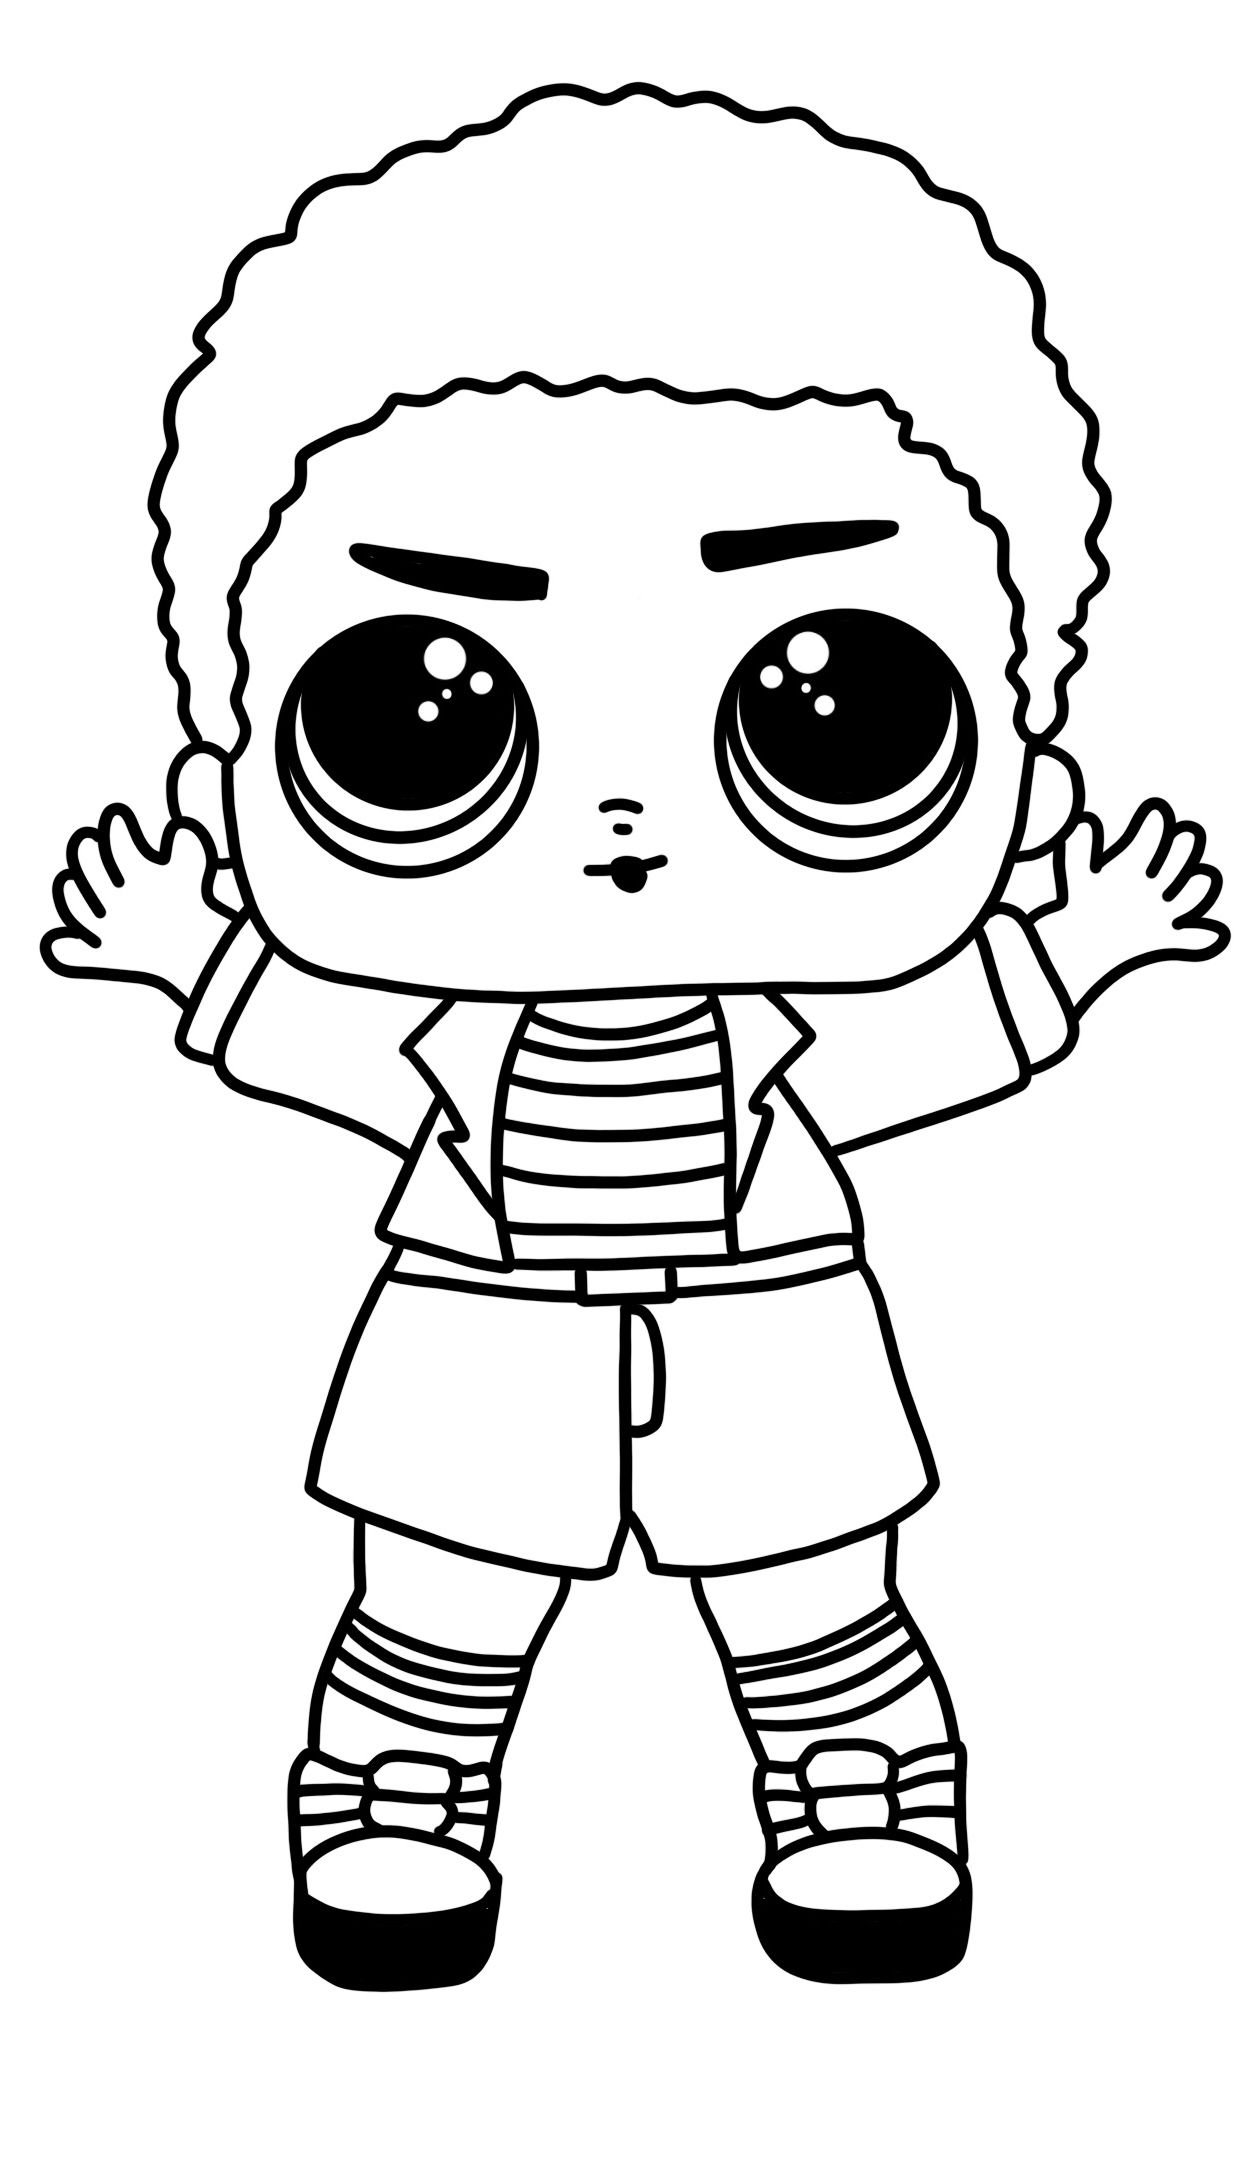 LOL 2019 boys coloring pages | Lol dolls, Coloring pages for boys, Boy  coloring